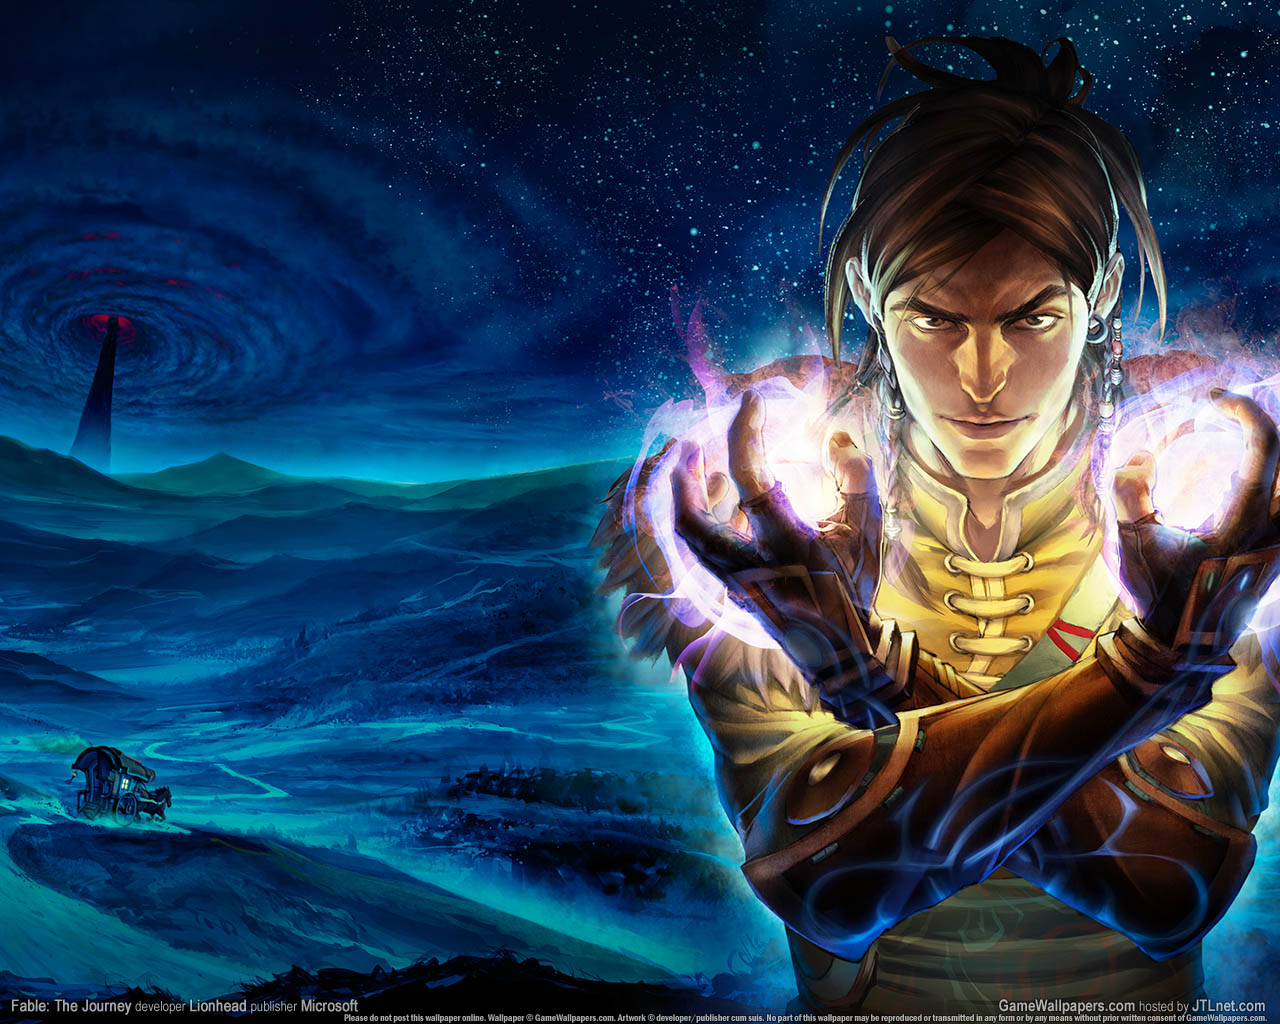 Fable: The Journey achtergrond 02 1280x1024